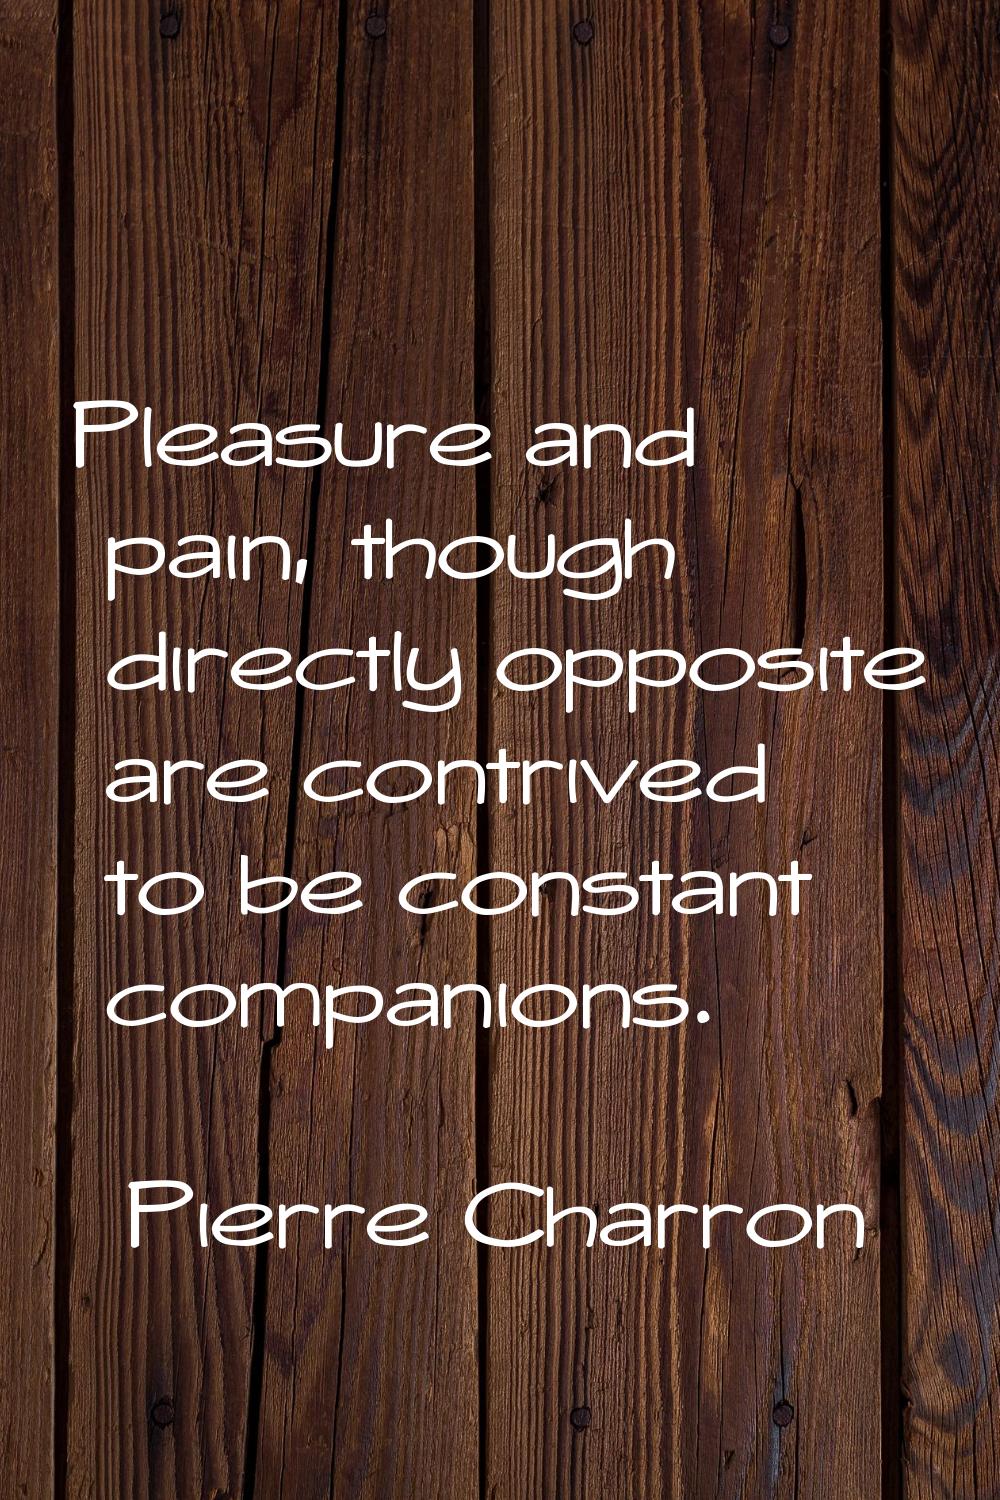 Pleasure and pain, though directly opposite are contrived to be constant companions.